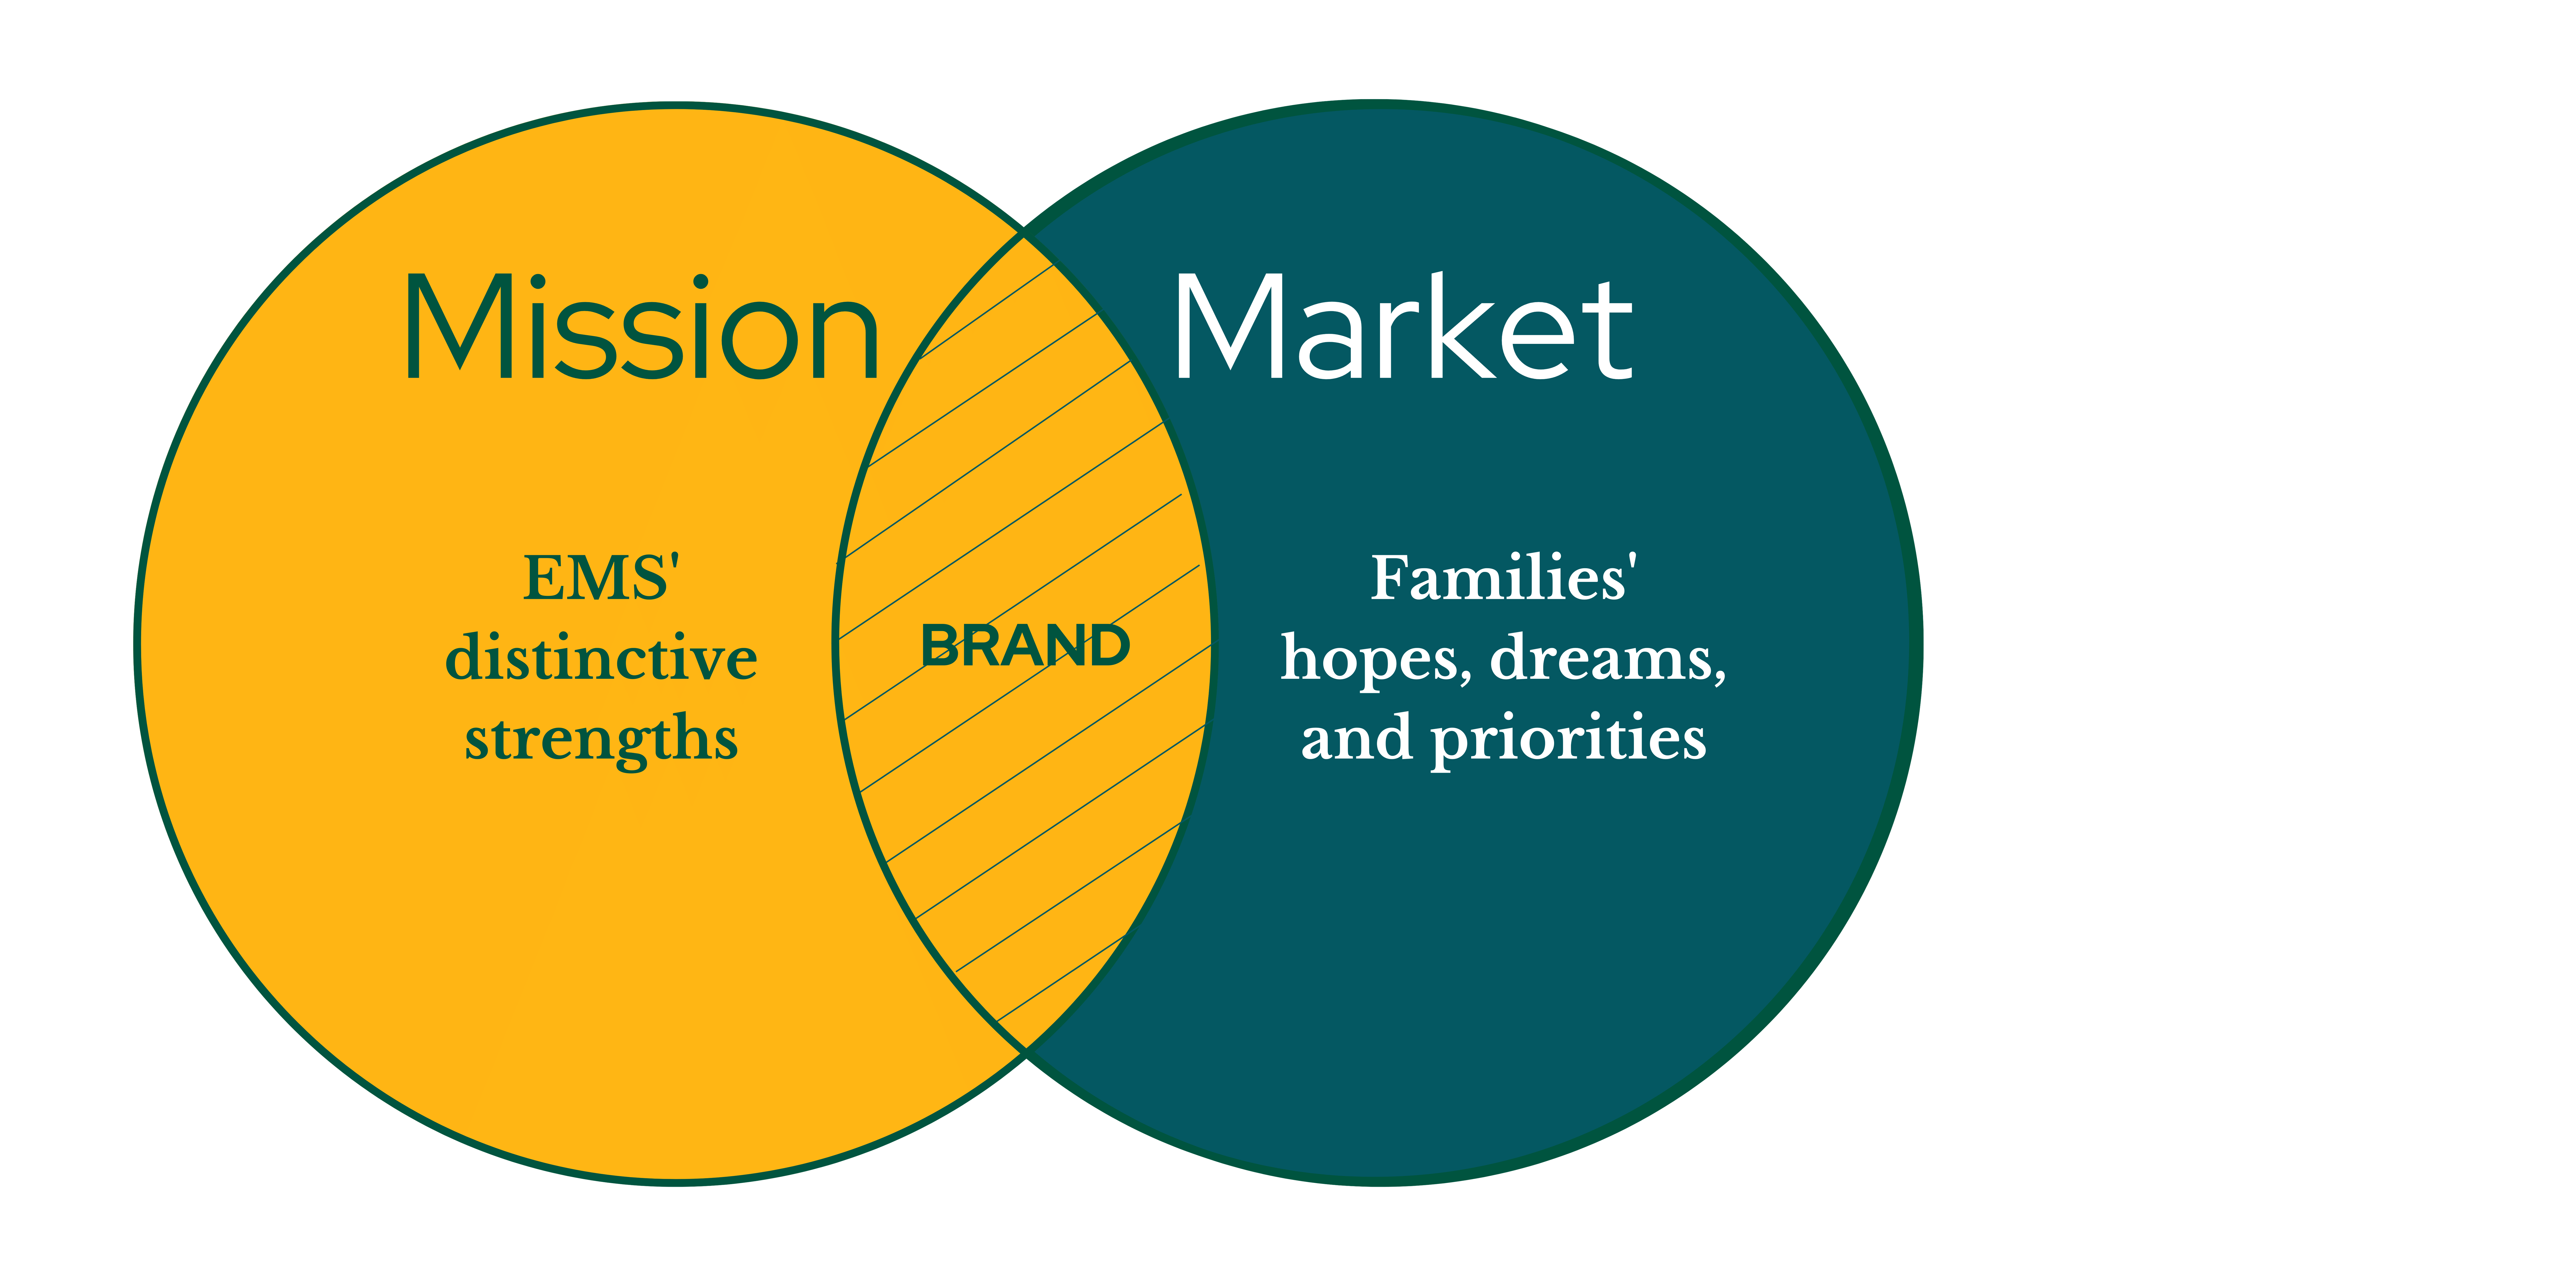 Graphic showing that brand lies in the area where mission and marketing meet